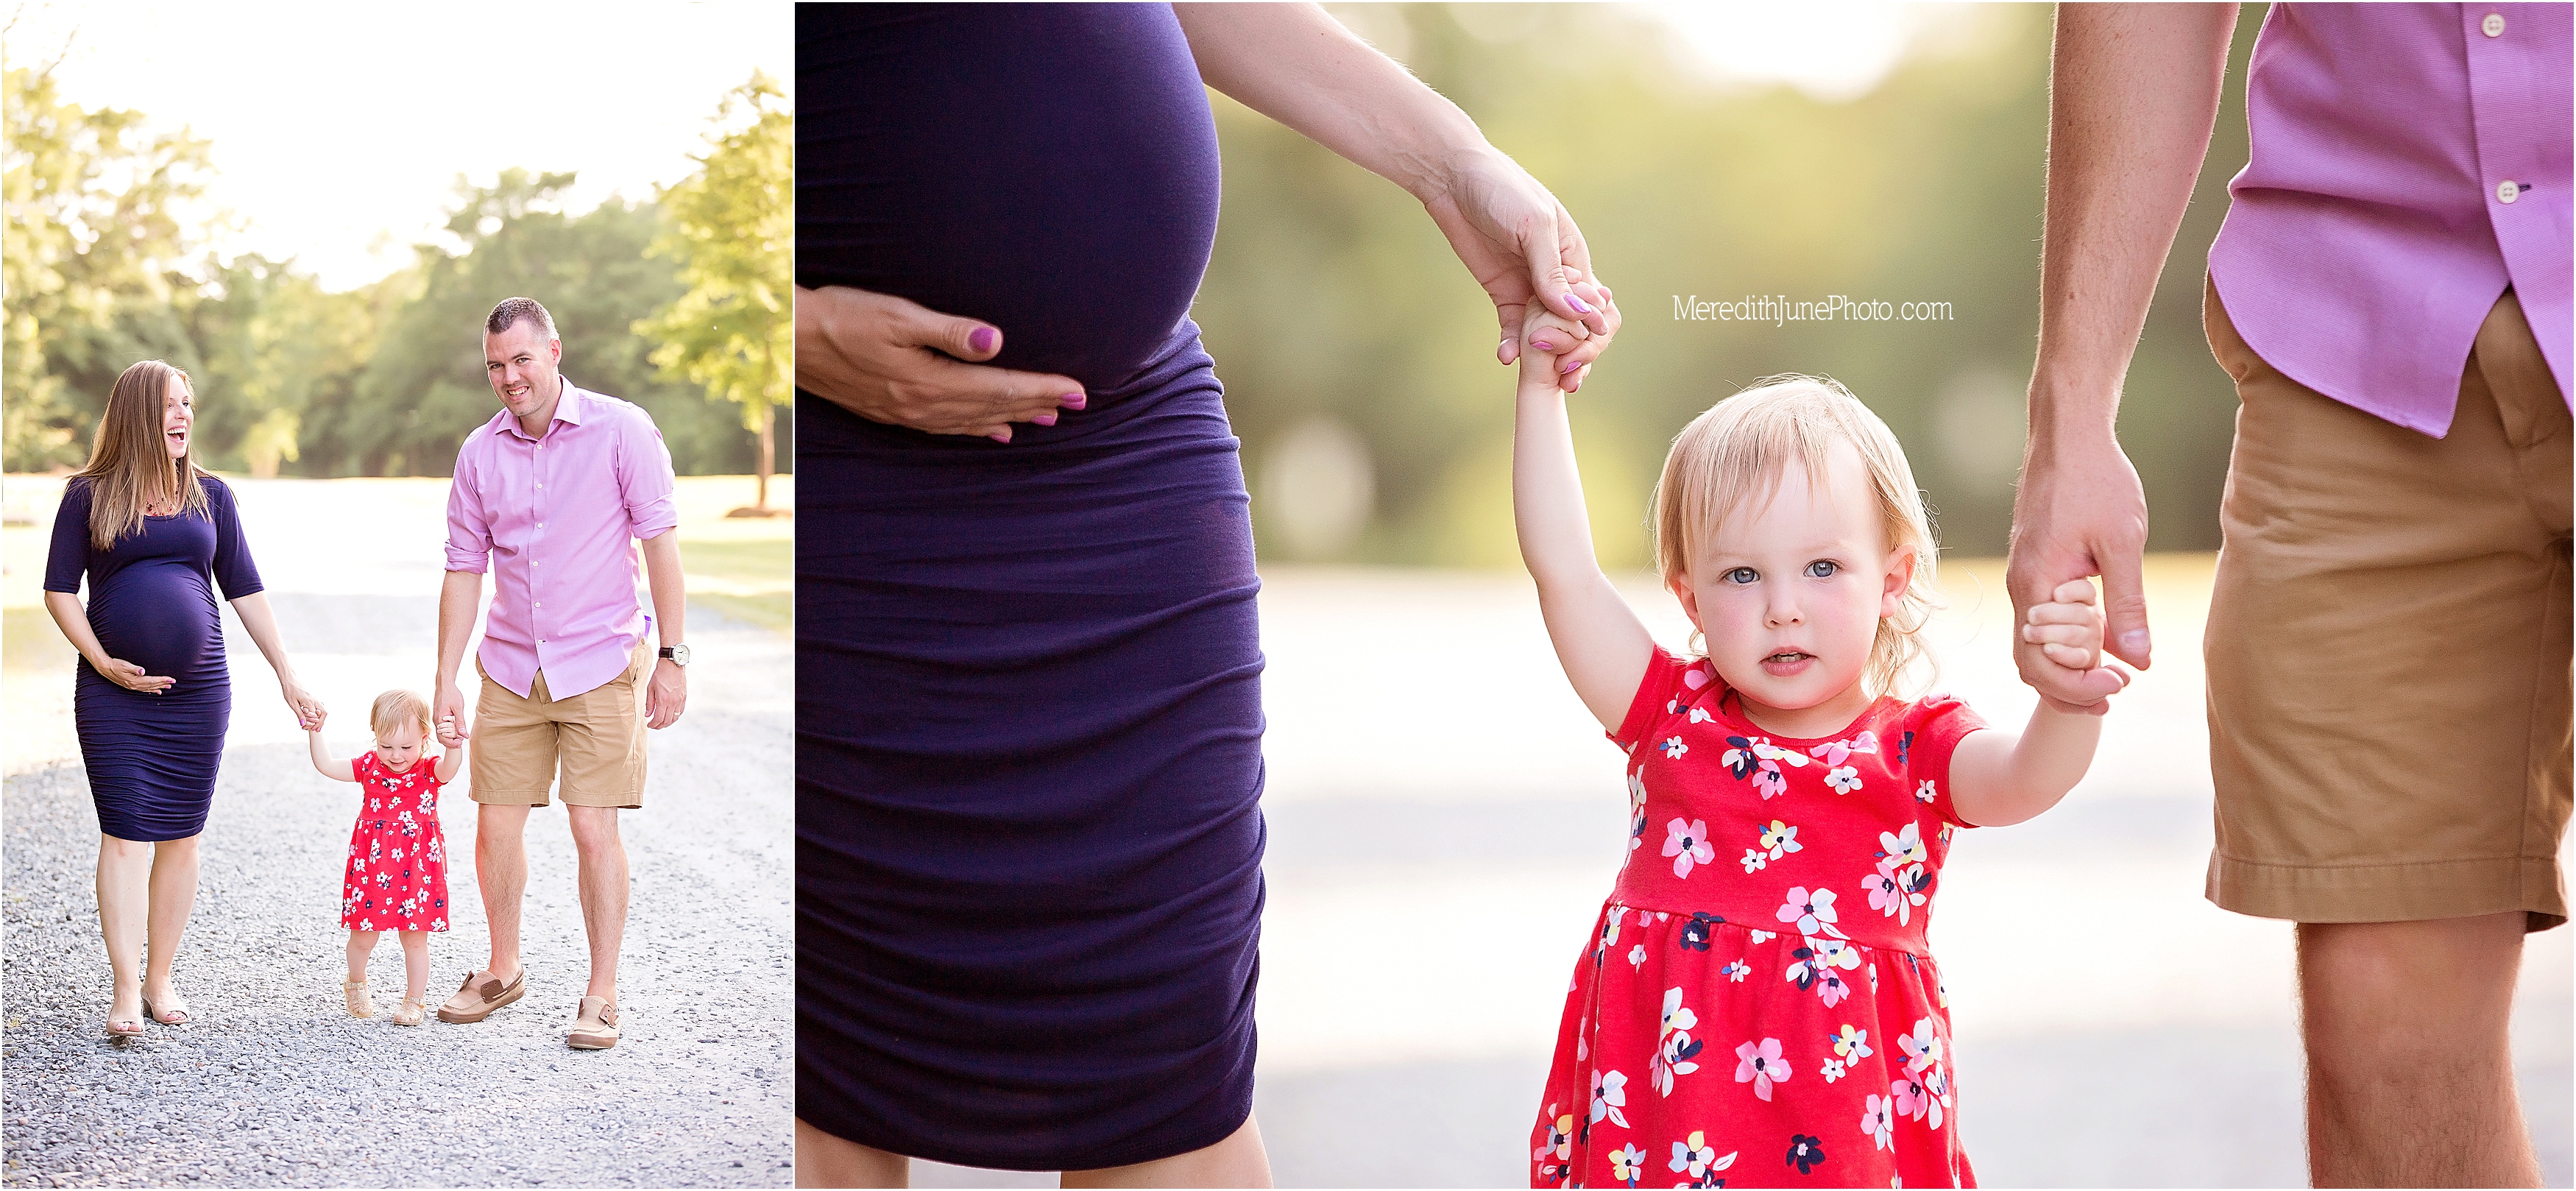 Outdoor family and maternity photo session